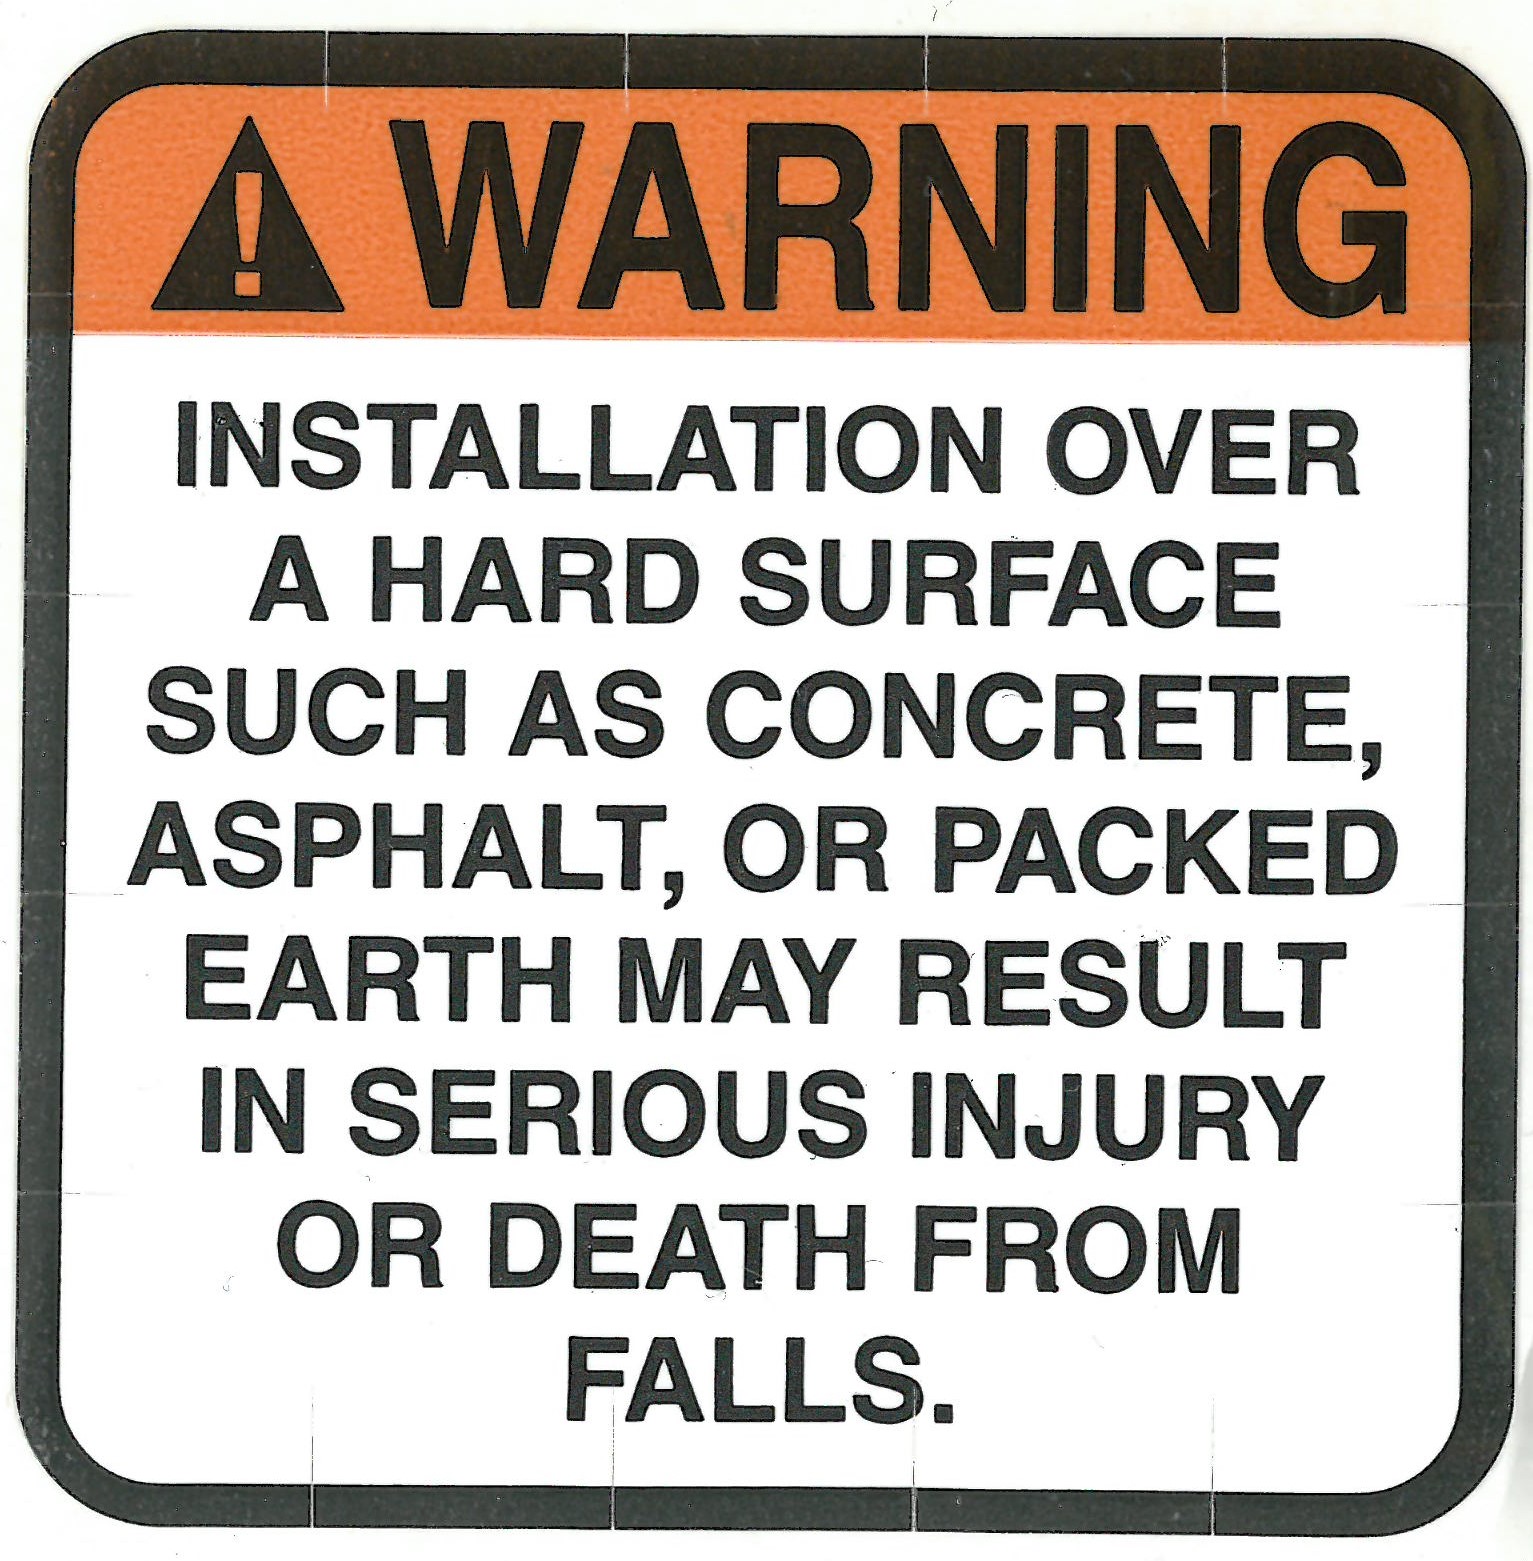 Warning! Installation over a hard surface such as concrete, asphalt, or packed earth may result in serious injury or death from falls.